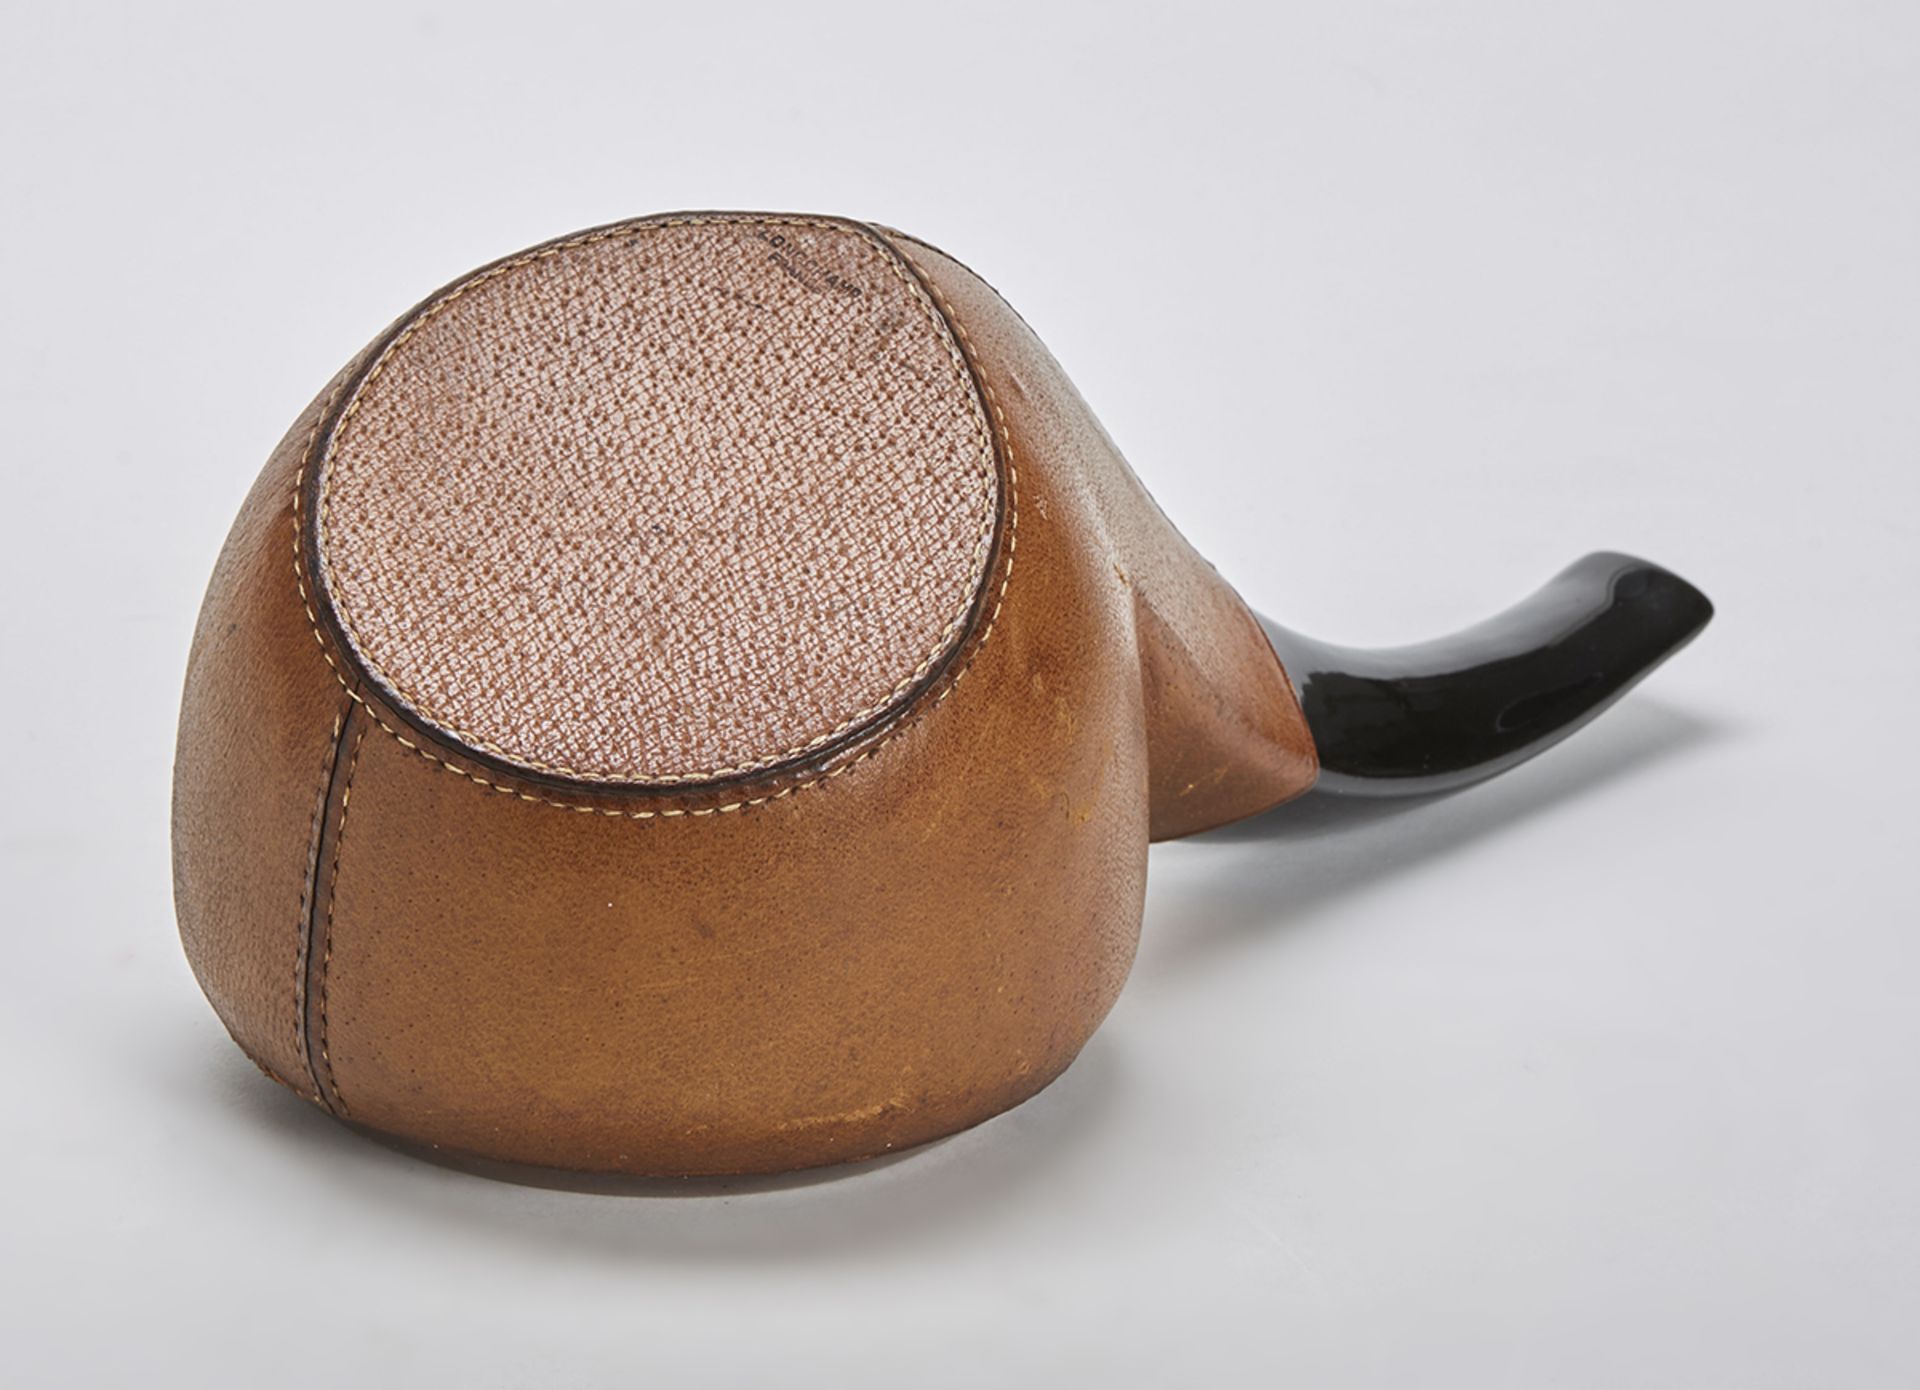 Ceramic & Leather Pipe Container By George Jouve C.1950 - Image 5 of 7